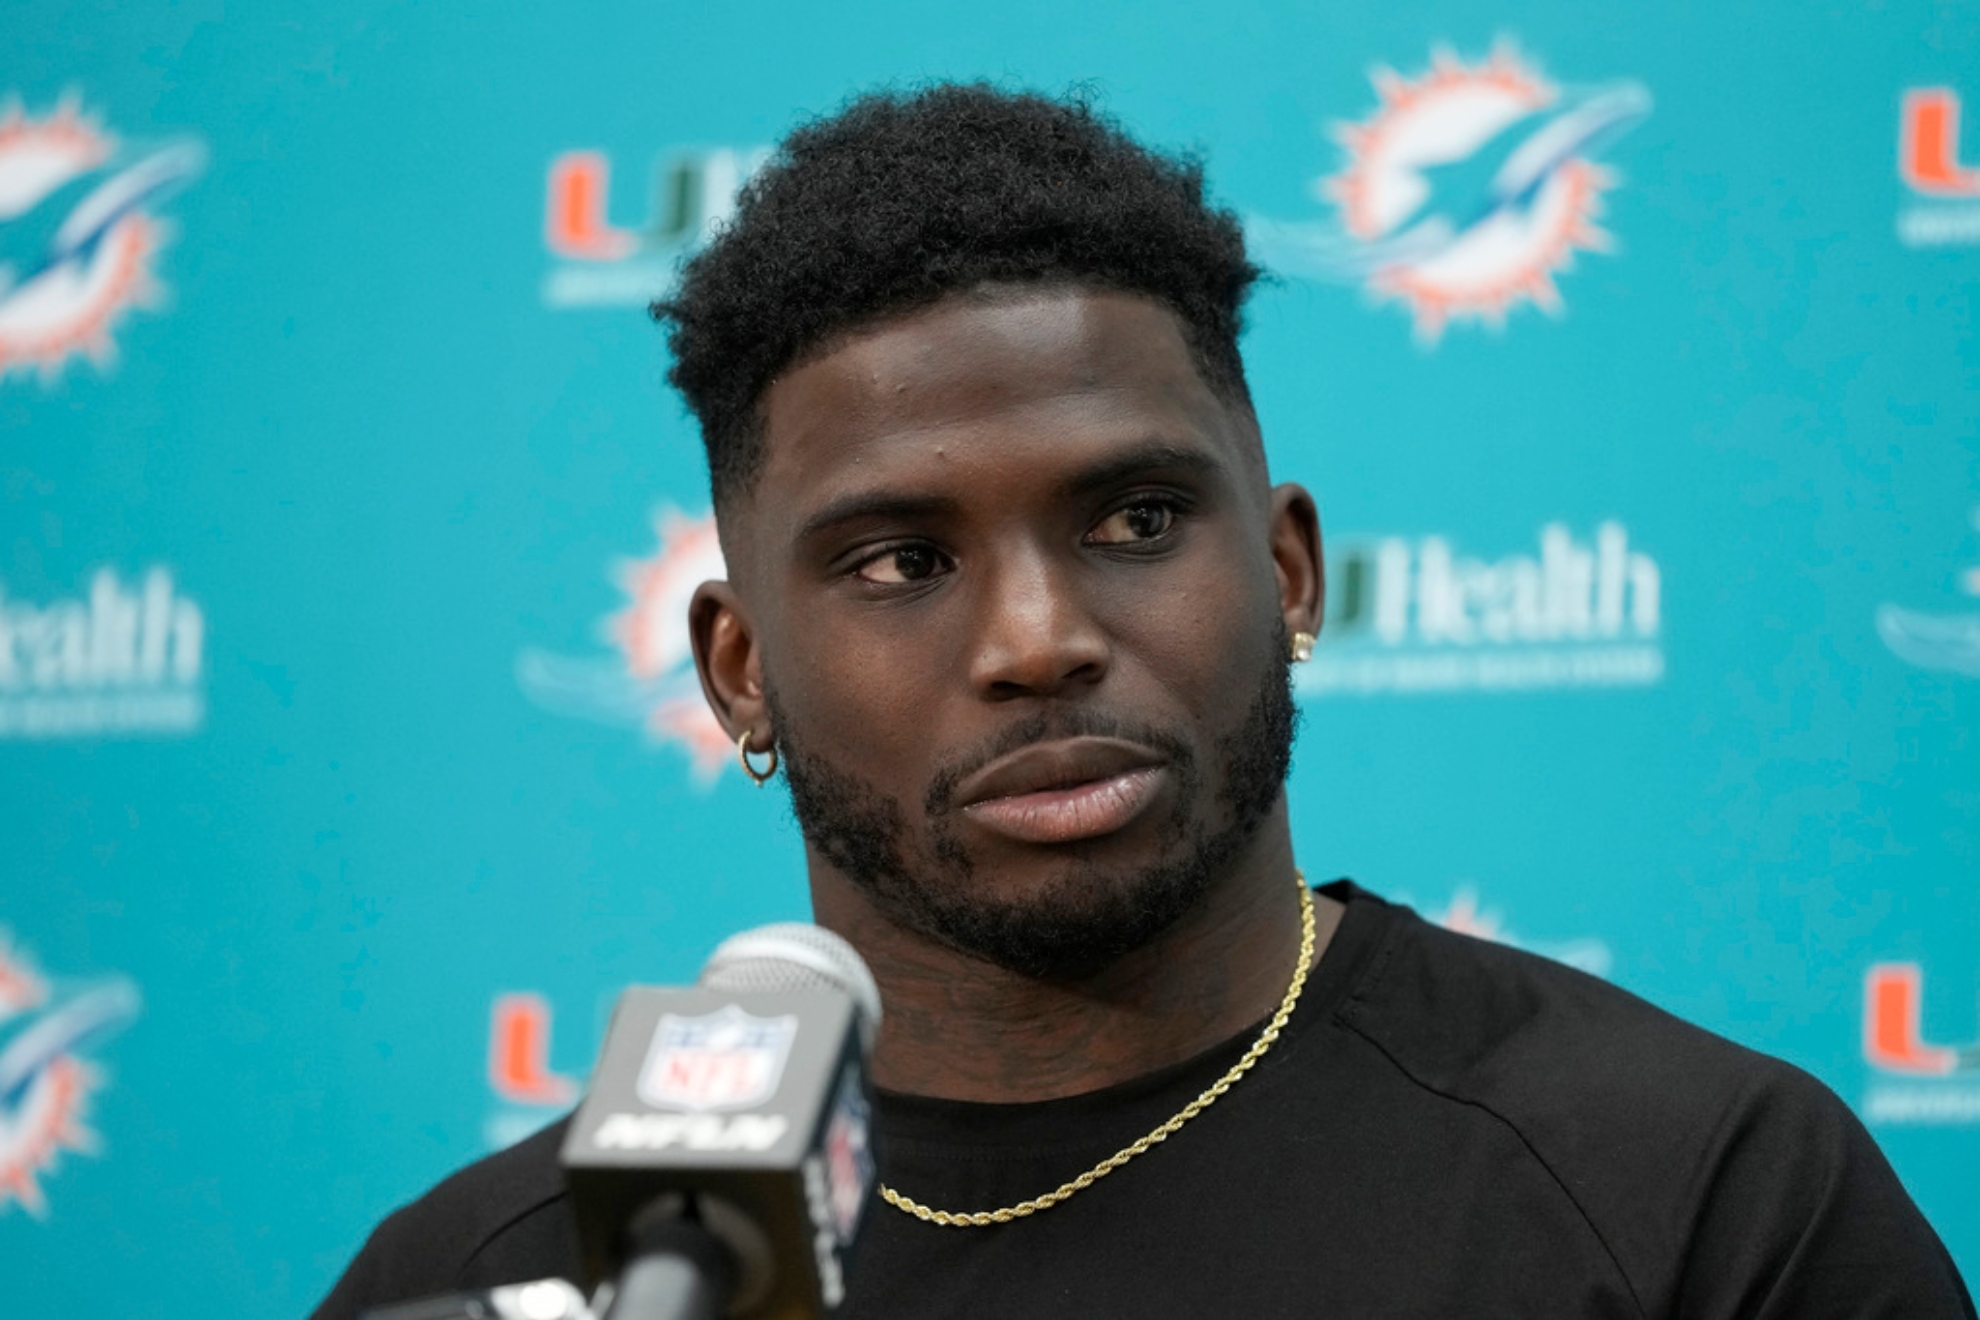 Tyreek Hill and the Dolphins will have to regroup and make some changes in the offseason